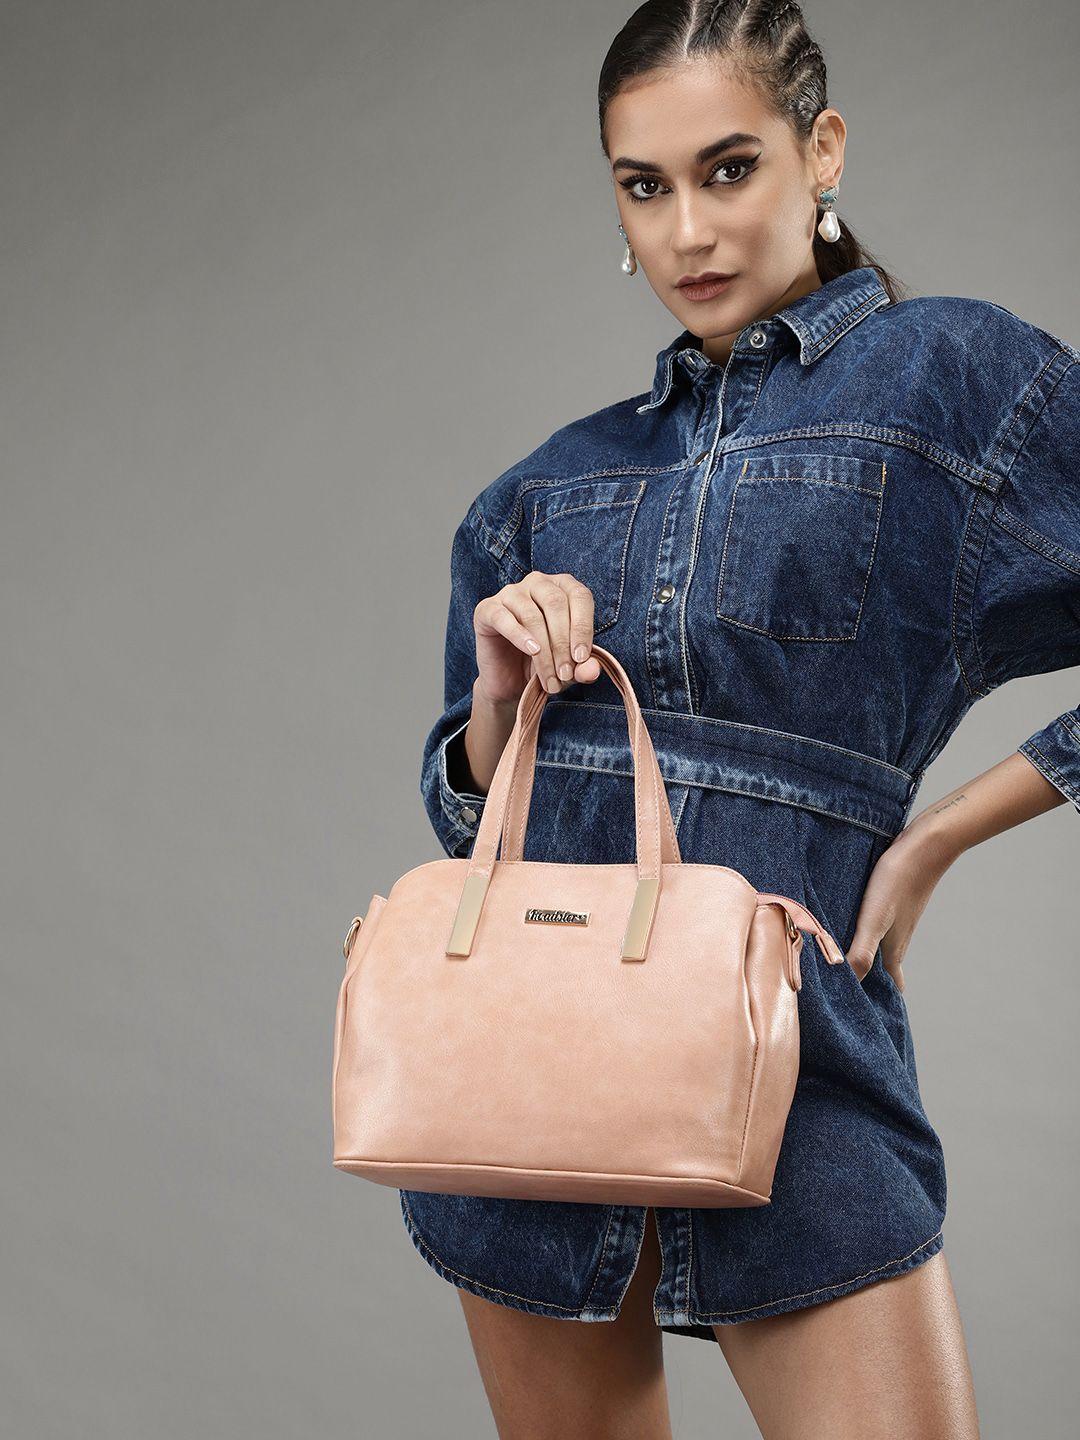 roadster peach-coloured structured handheld bag